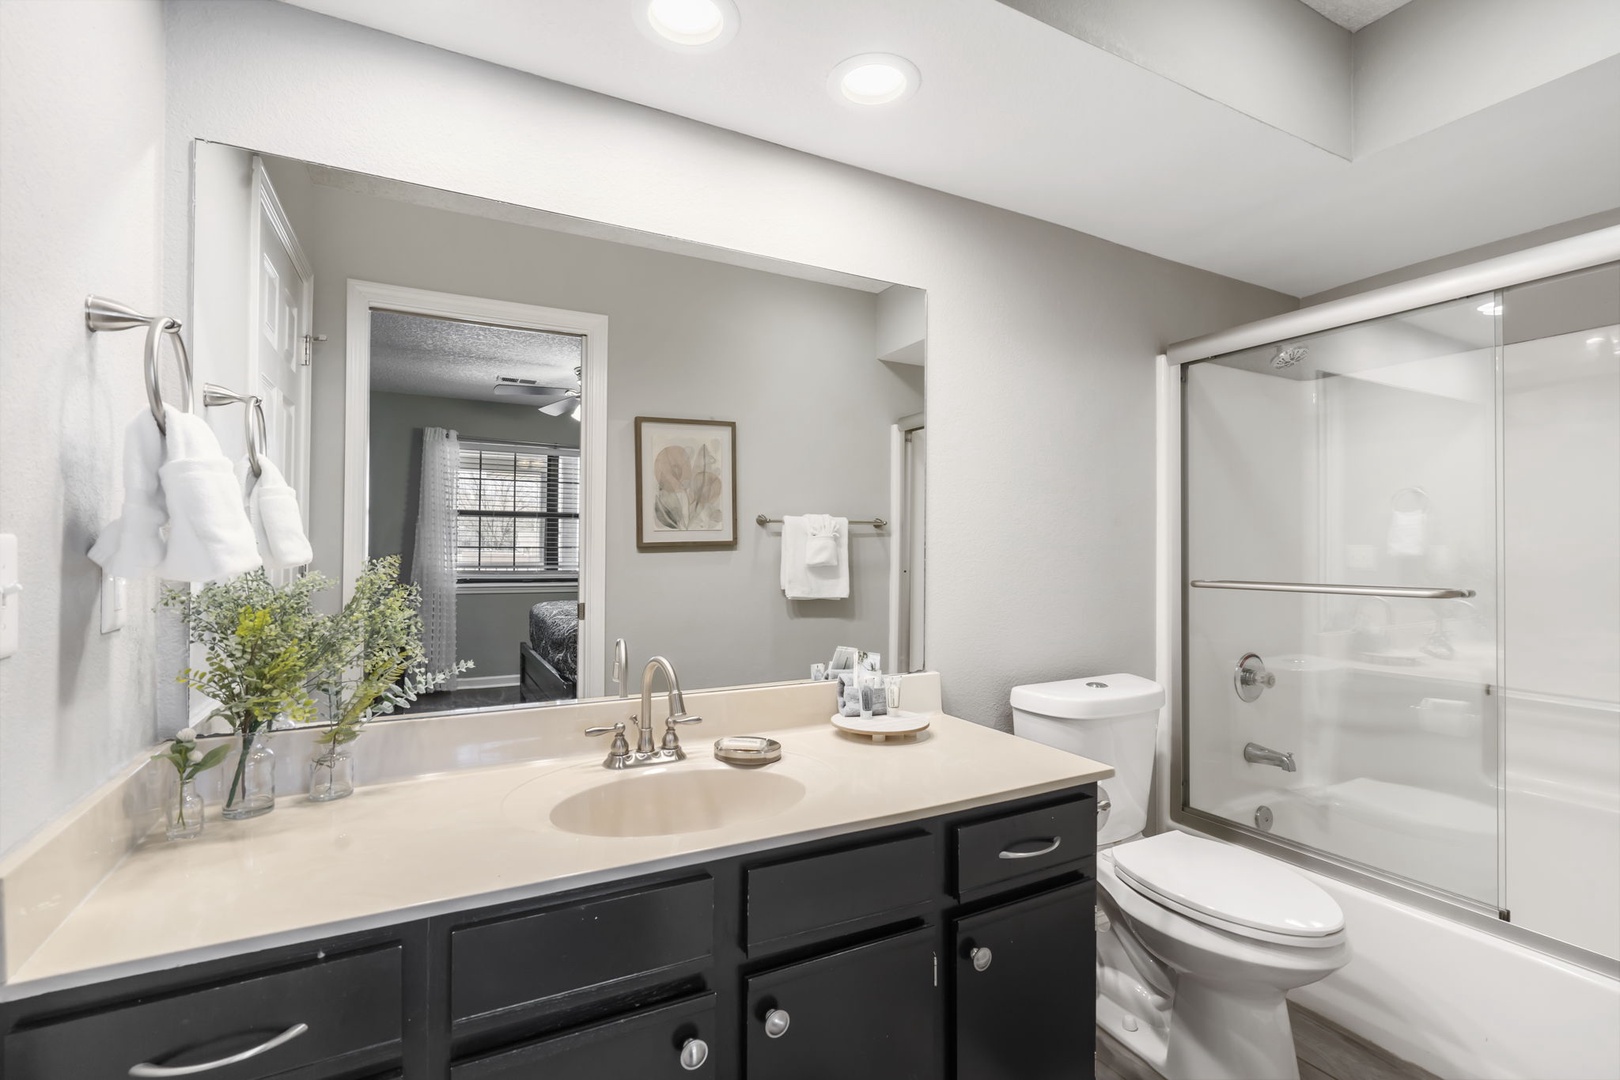 Unit 19: The 2nd ensuite includes a single vanity & shower/tub combo